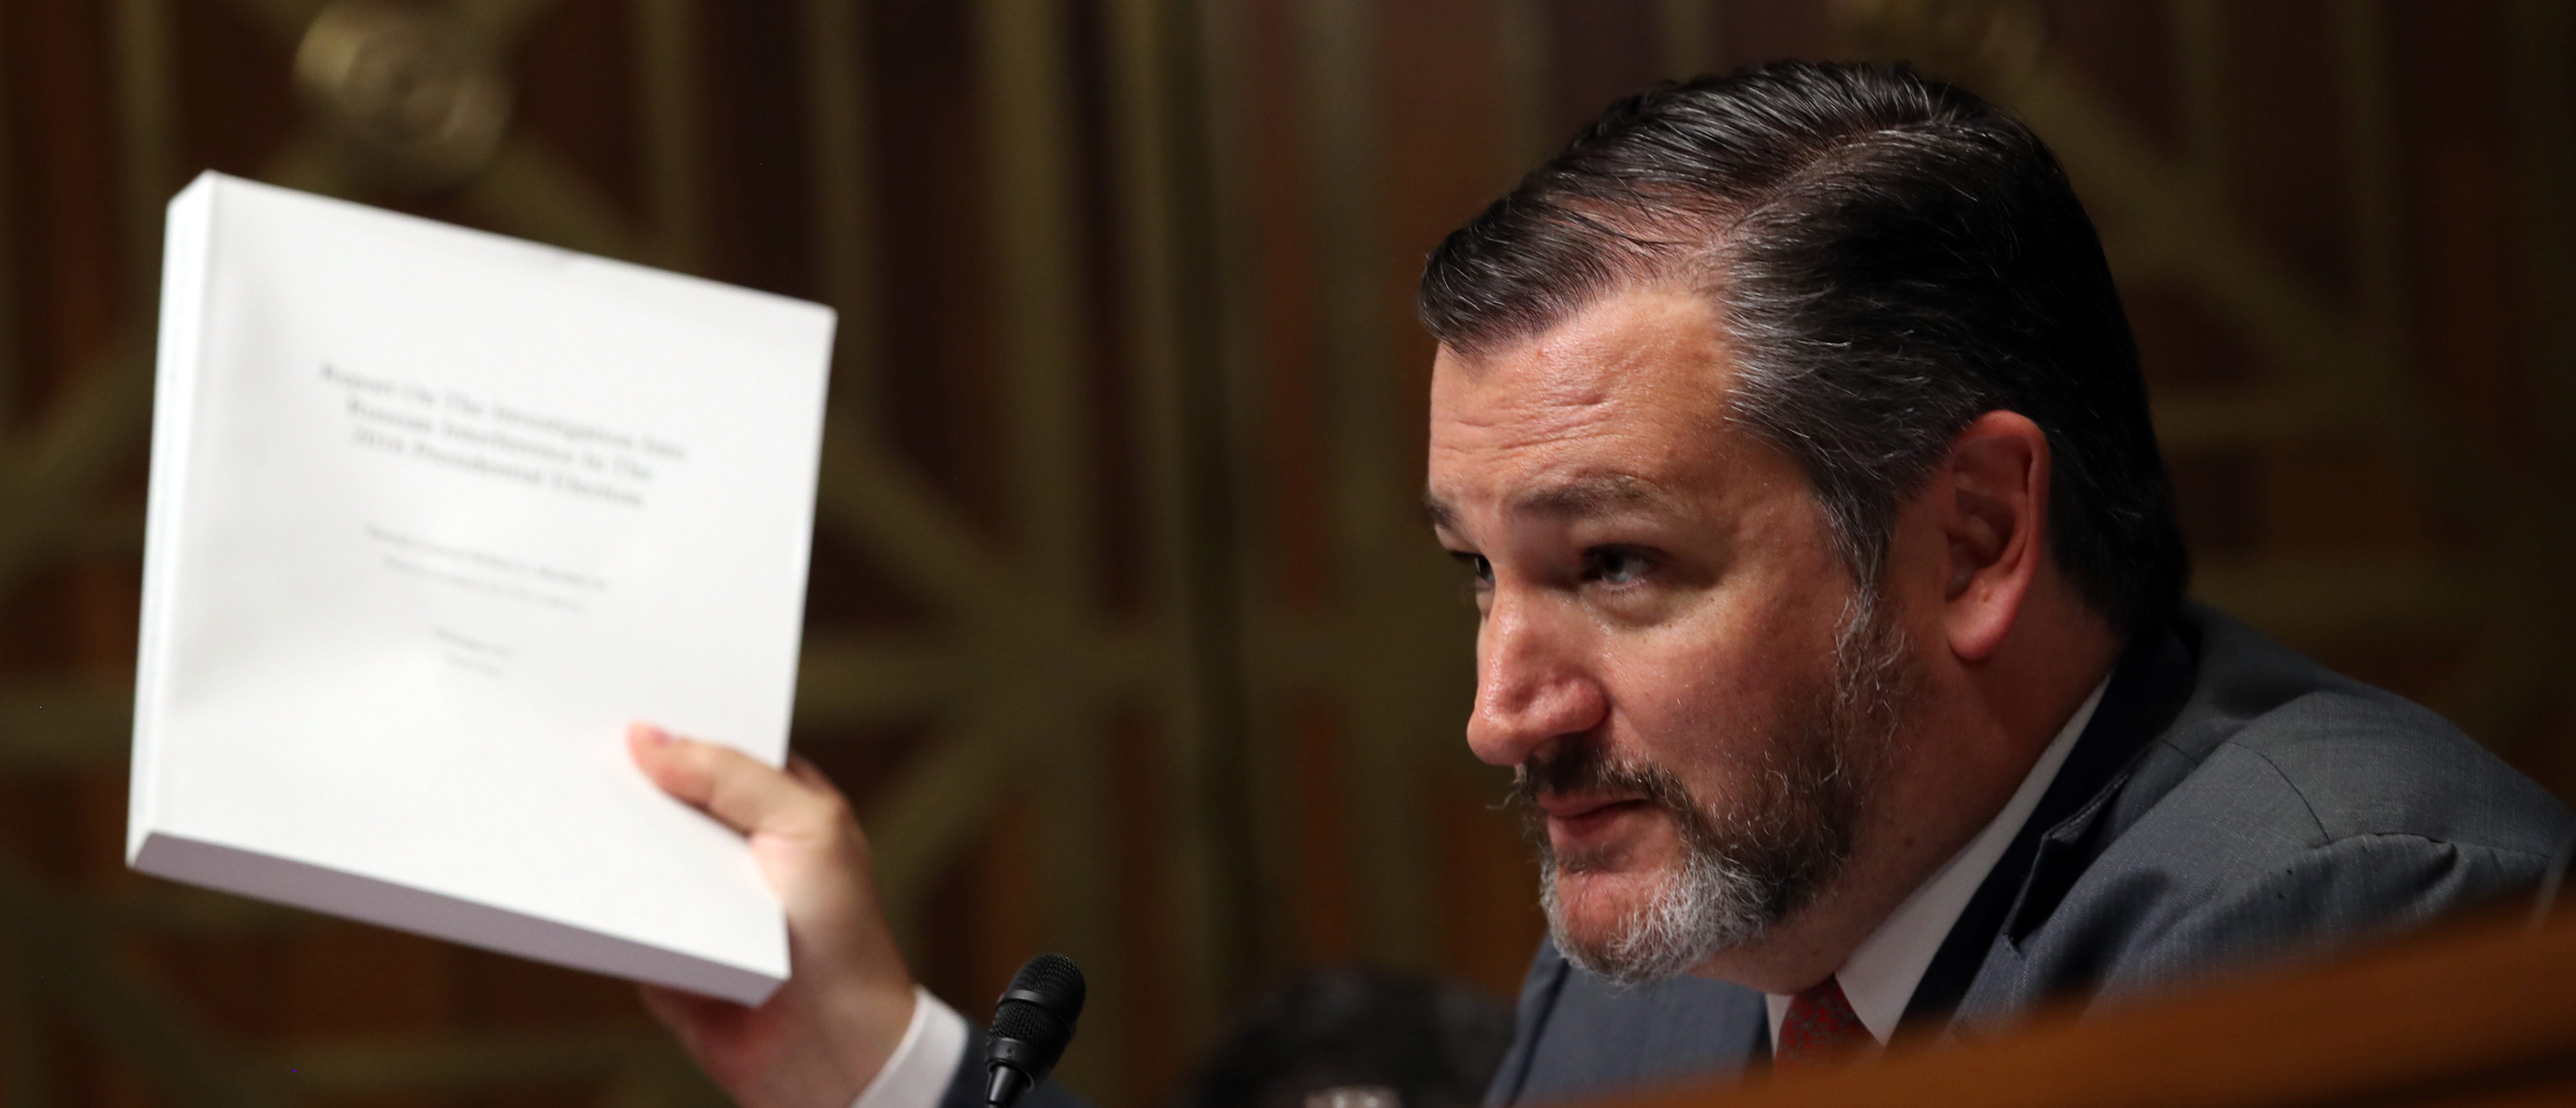 WASHINGTON, DC - MAY 1: Sen. Ted Cruz (R-TX) holds the Mueller report while asking the U.S. Attorney General William Barr questions during the Senate Judiciary Committee hearing May 1, 2019 in Washington, DC. Barr testified on the Justice Department's investigation of Russian interference with the 2016 presidential election. (Photo by Win McNamee/Getty Images)